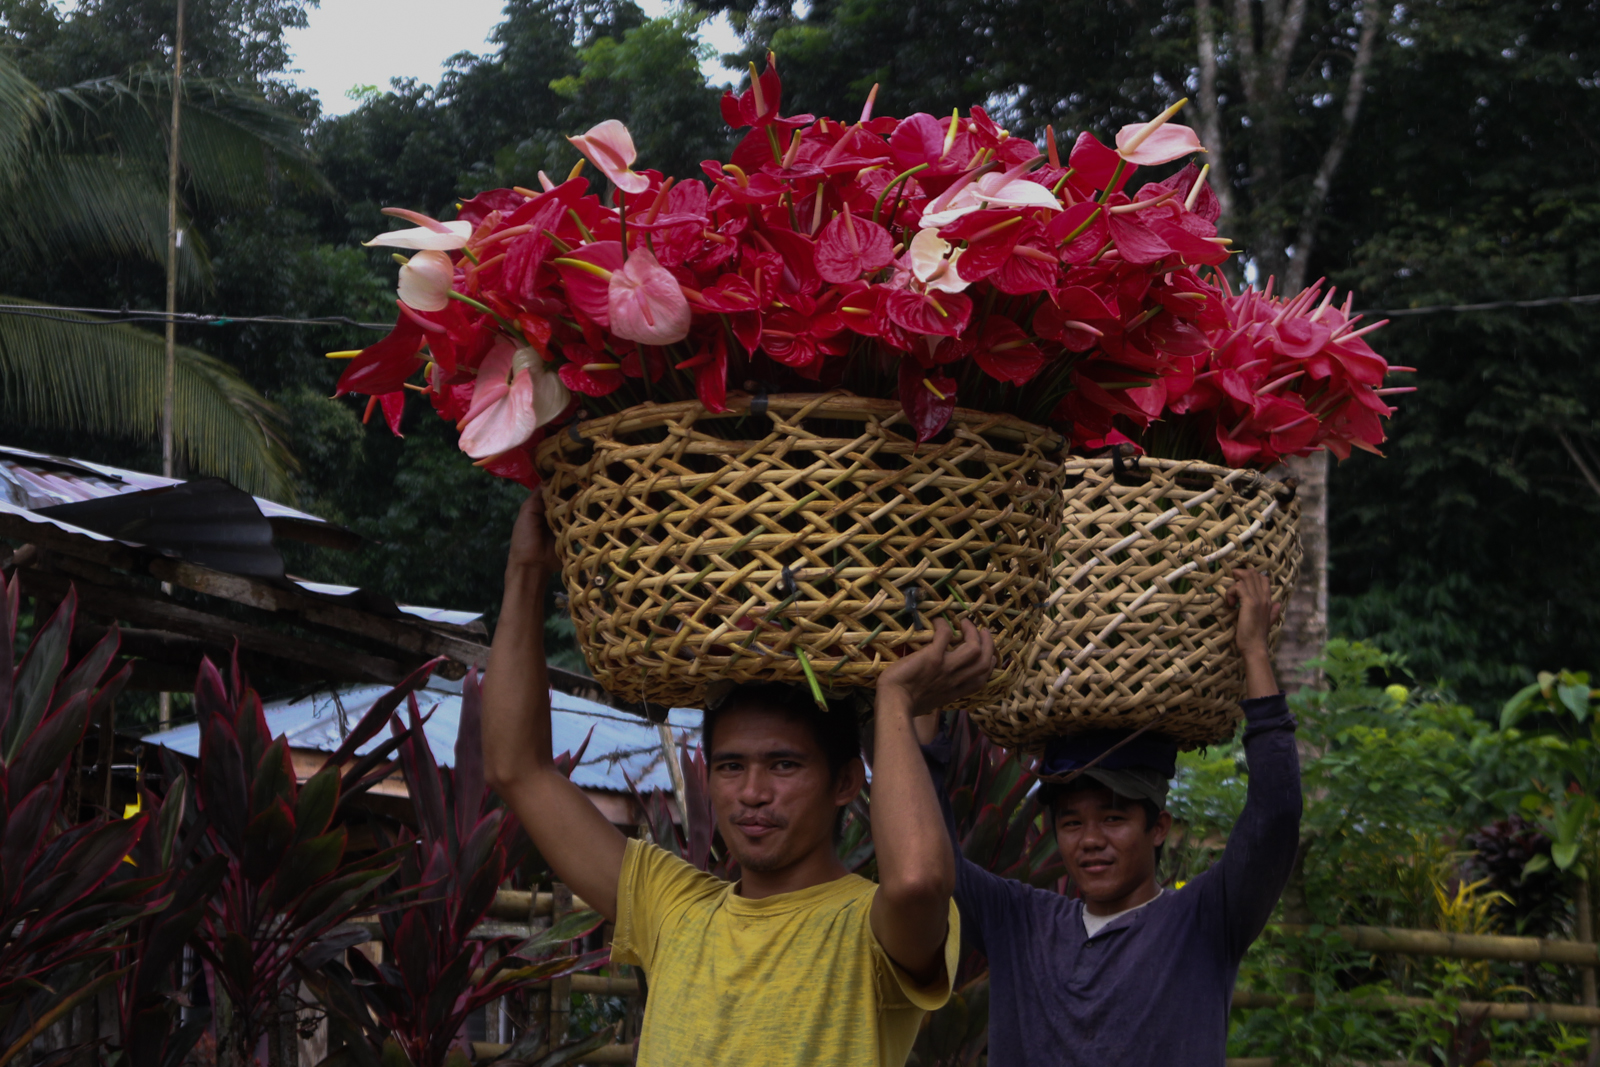 BASKETS IN BLOOM. Farmers deliver a basket full of anthuriums to a buying station in Purok 3, Barangay Batasan, Makilala, North Cotabato province.